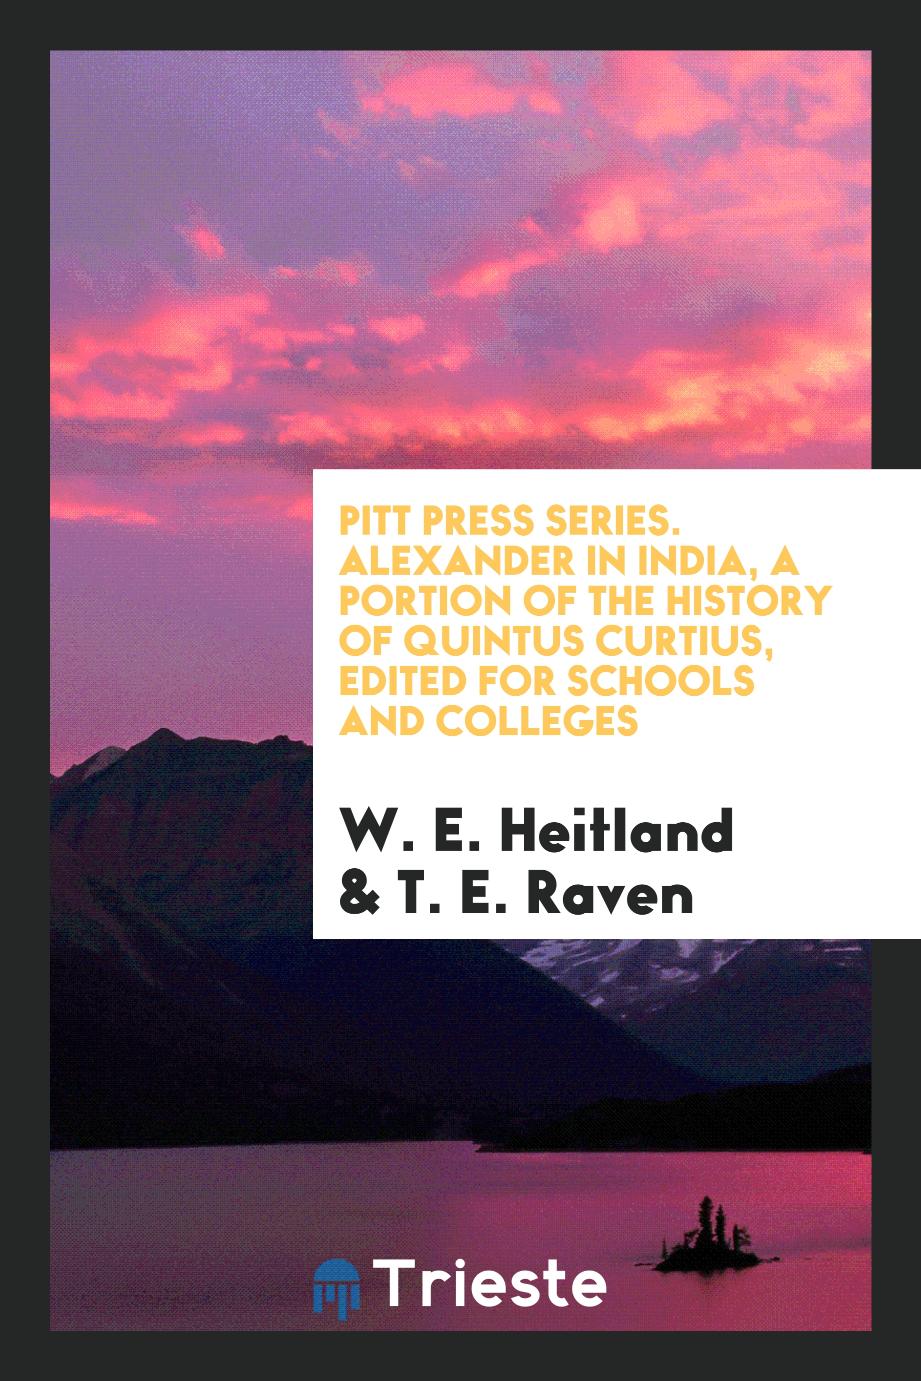 Pitt Press Series. Alexander in India, a Portion of the History of Quintus Curtius, Edited for Schools and Colleges